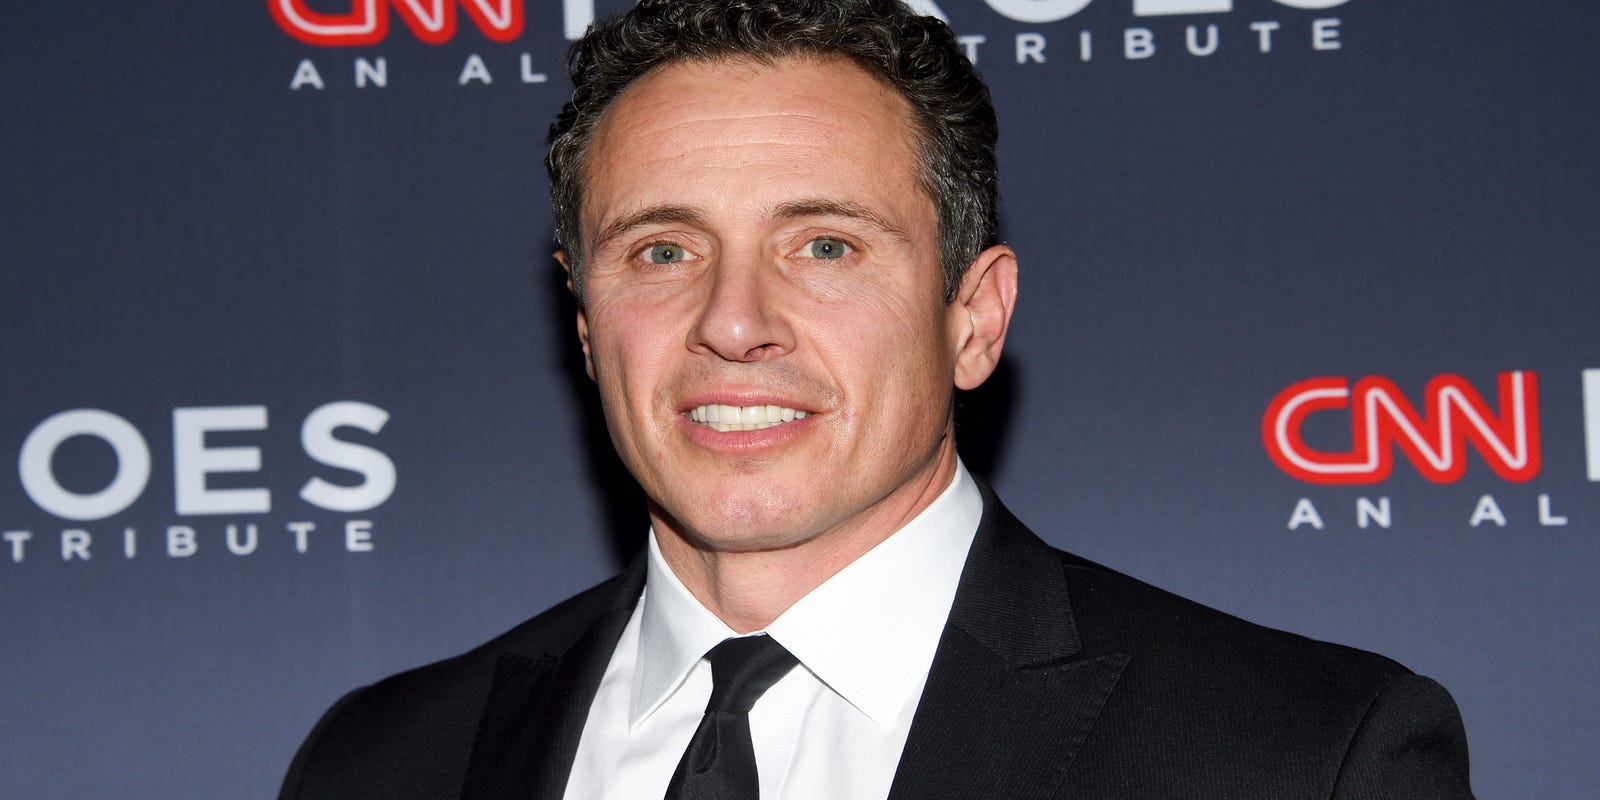 Chris Cuomo Reveals His Wife Is Also Covid 19 Positive